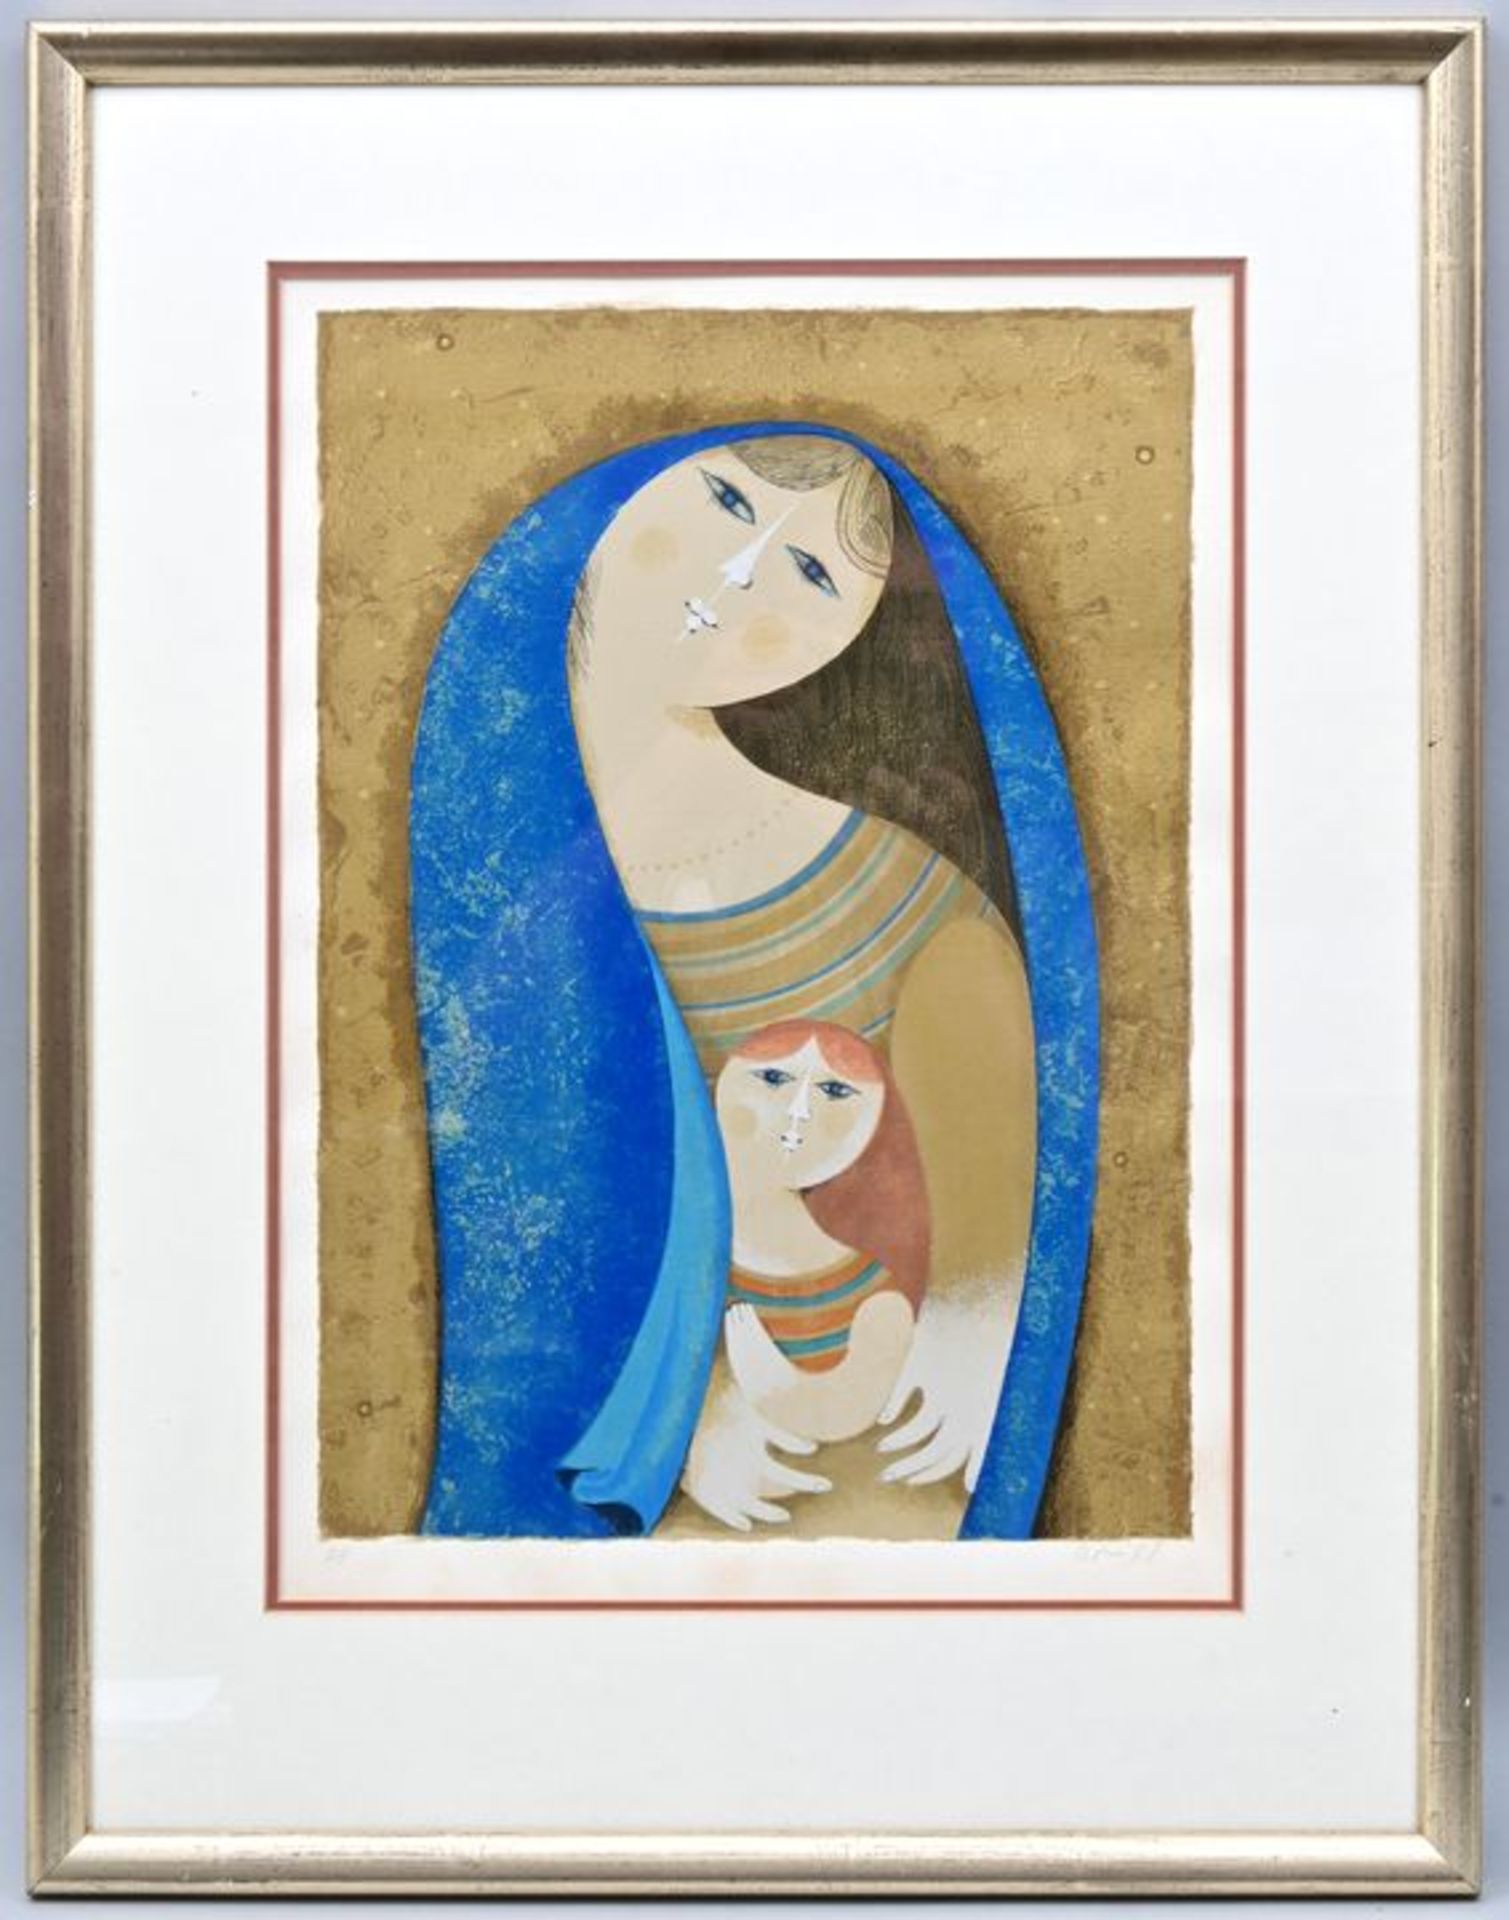 Briss Sami Mutter mit Kind / mother with child, colour lithograph - Image 2 of 5